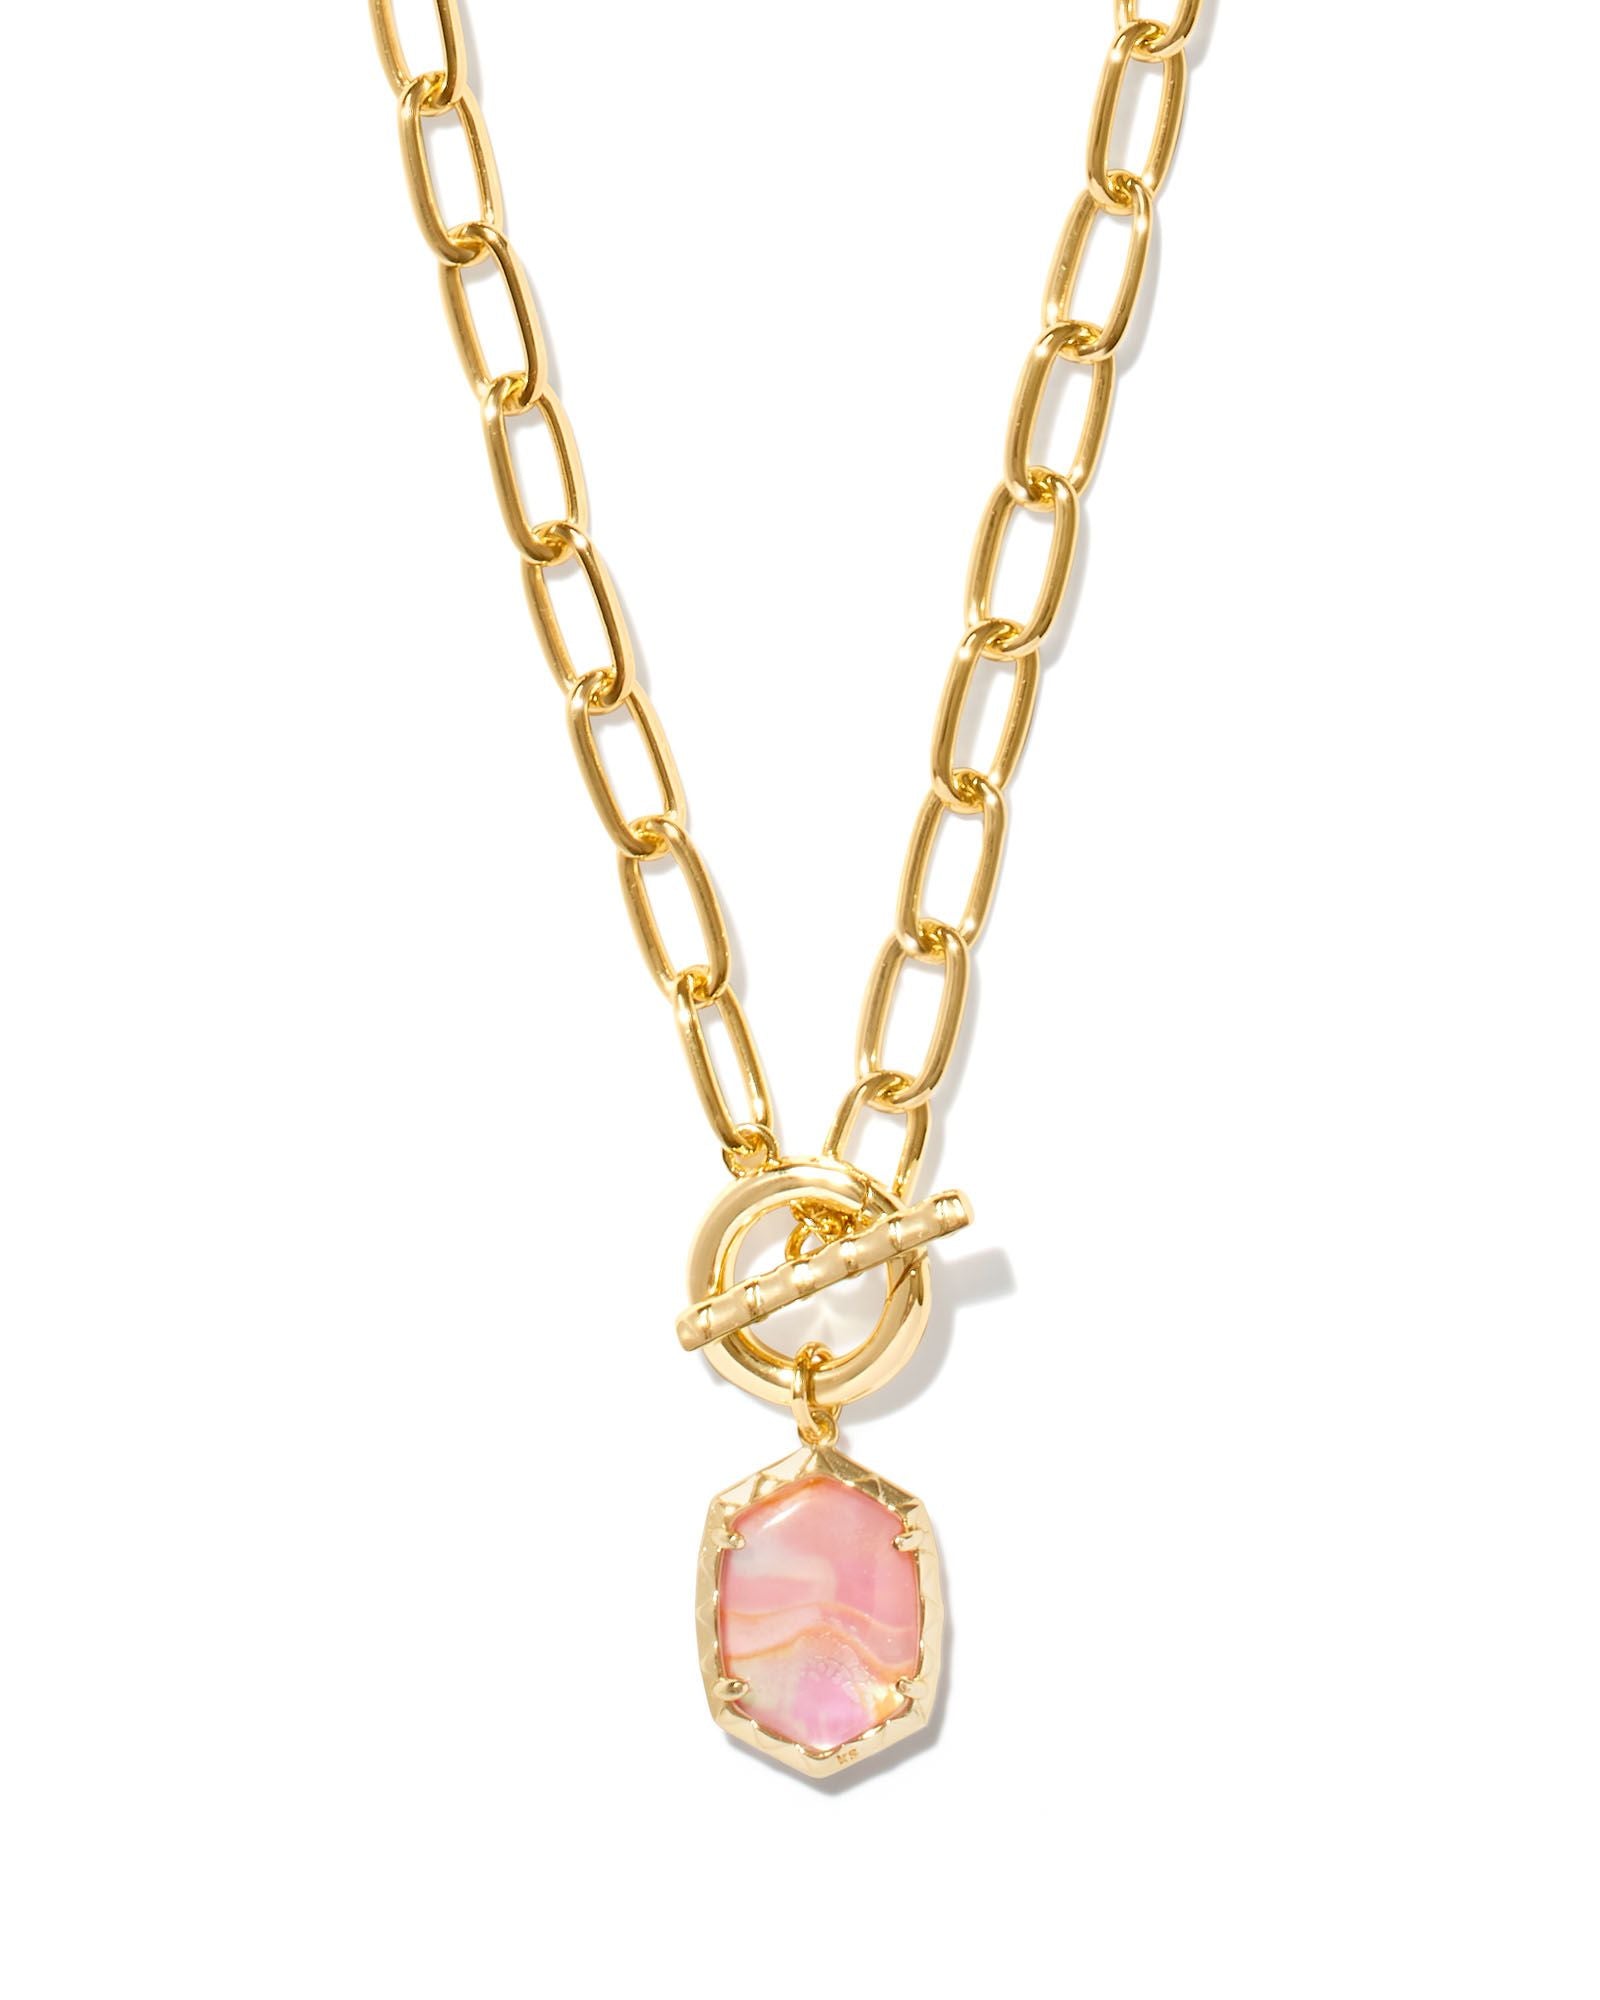 Daphne Link And Chain Necklace Gold Light Pink Iridescent Abalone